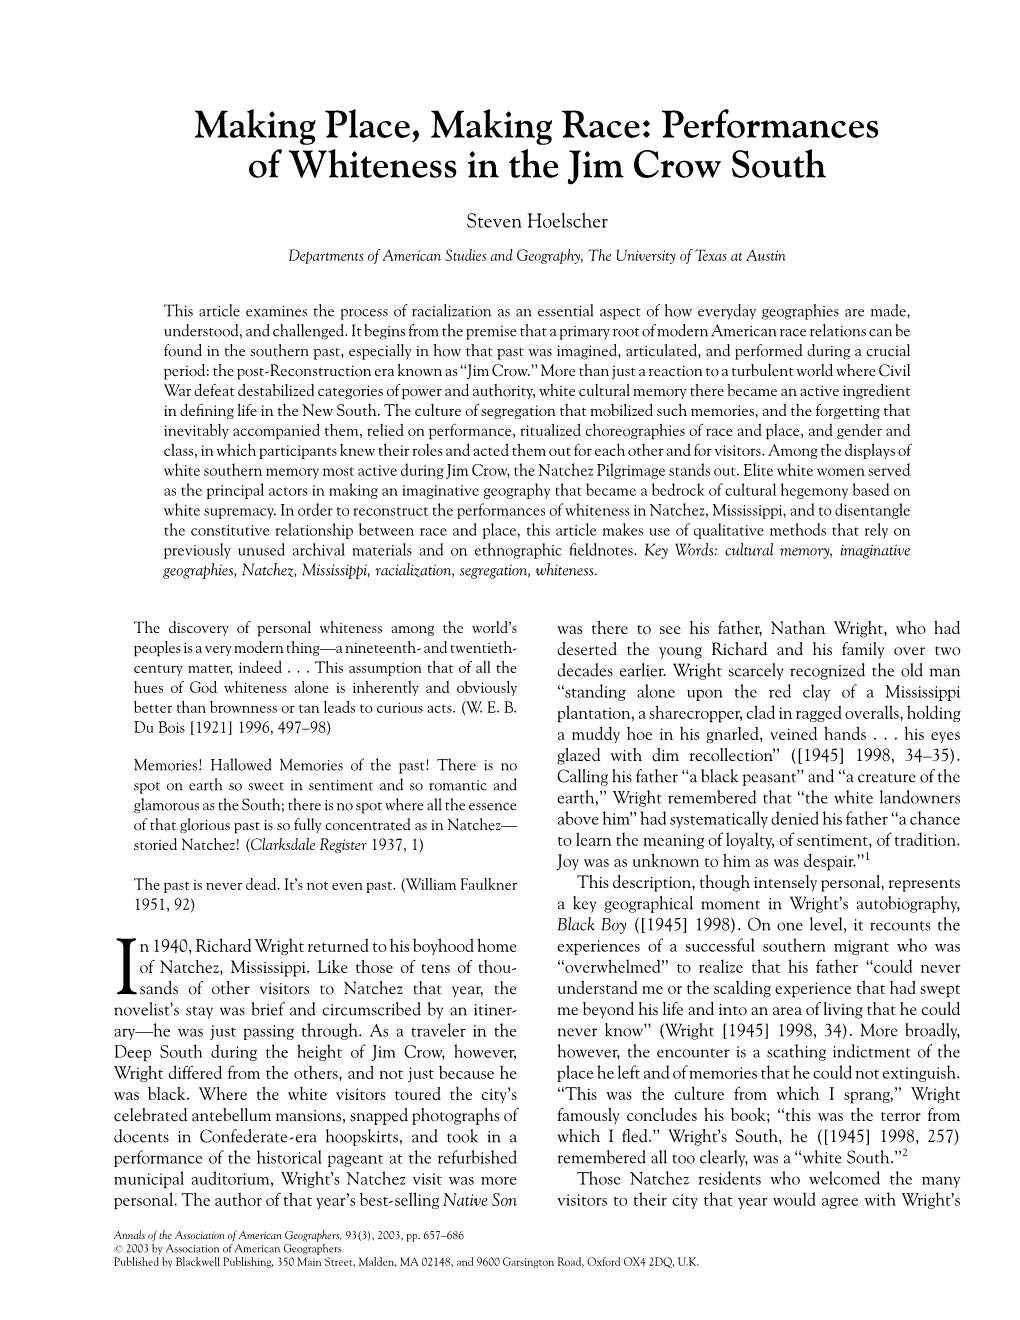 Performances of Whiteness in the Jim Crow South